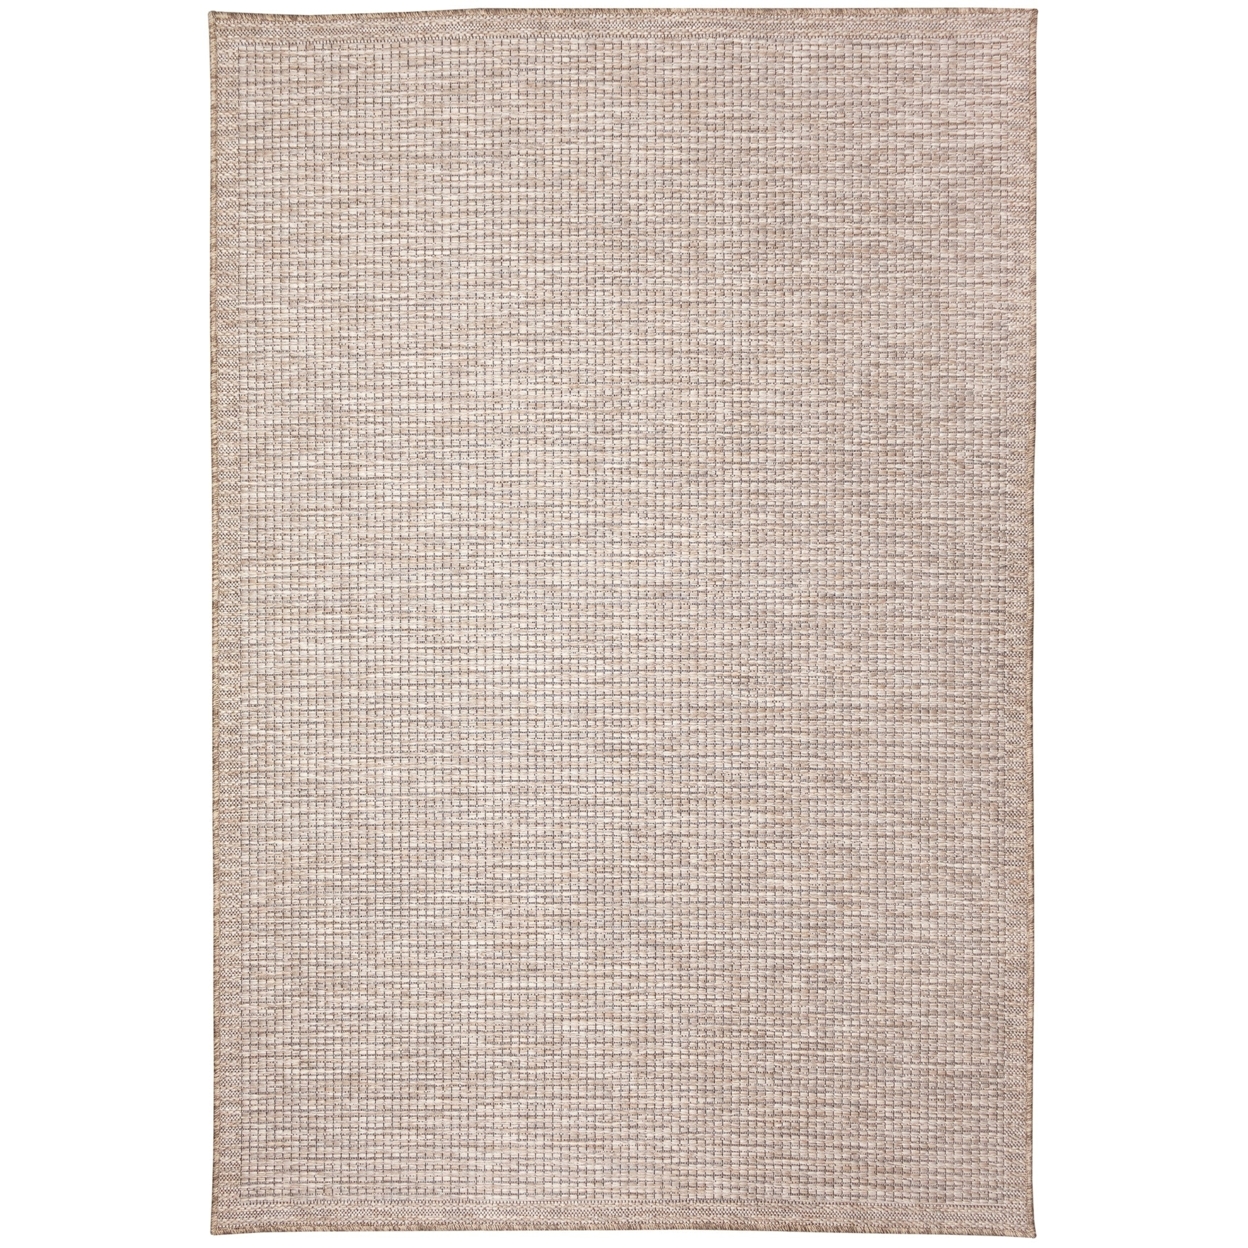 Liora Manne Orly Texture Indoor Outdoor Area Rug Natural - 5'3 X 7'3